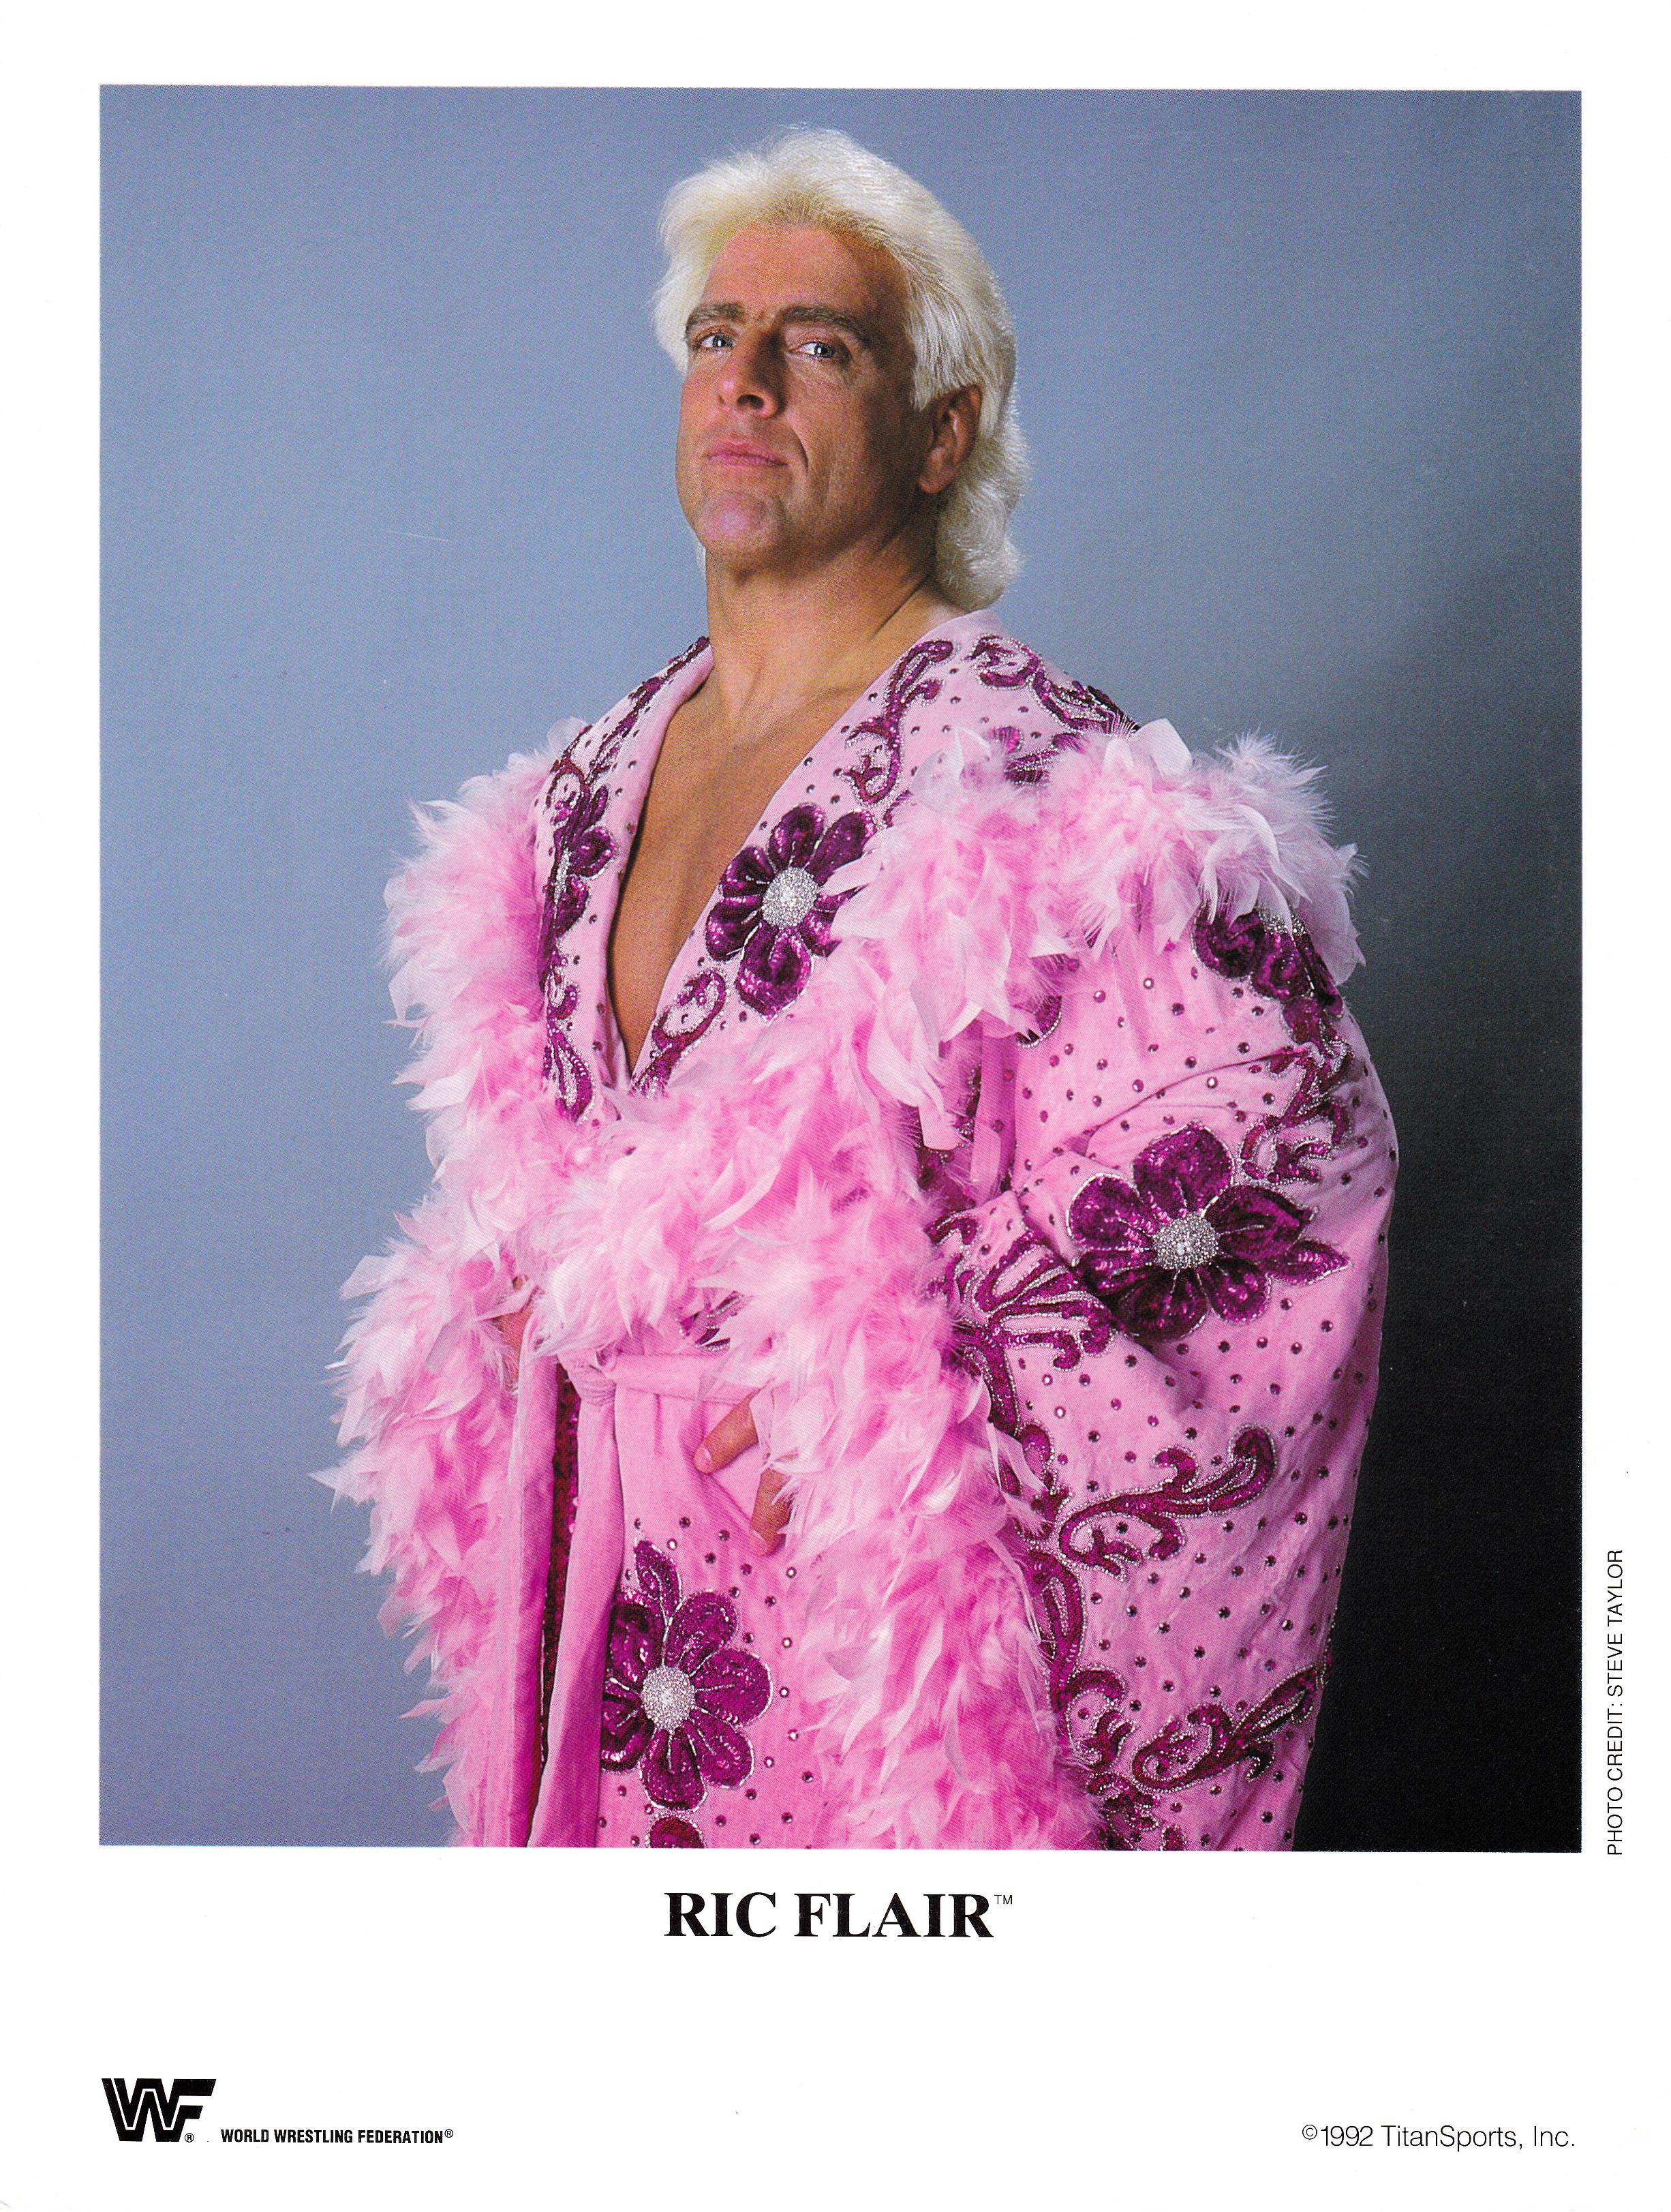 HQ Ric Flair Wallpapers | File 1364.29Kb